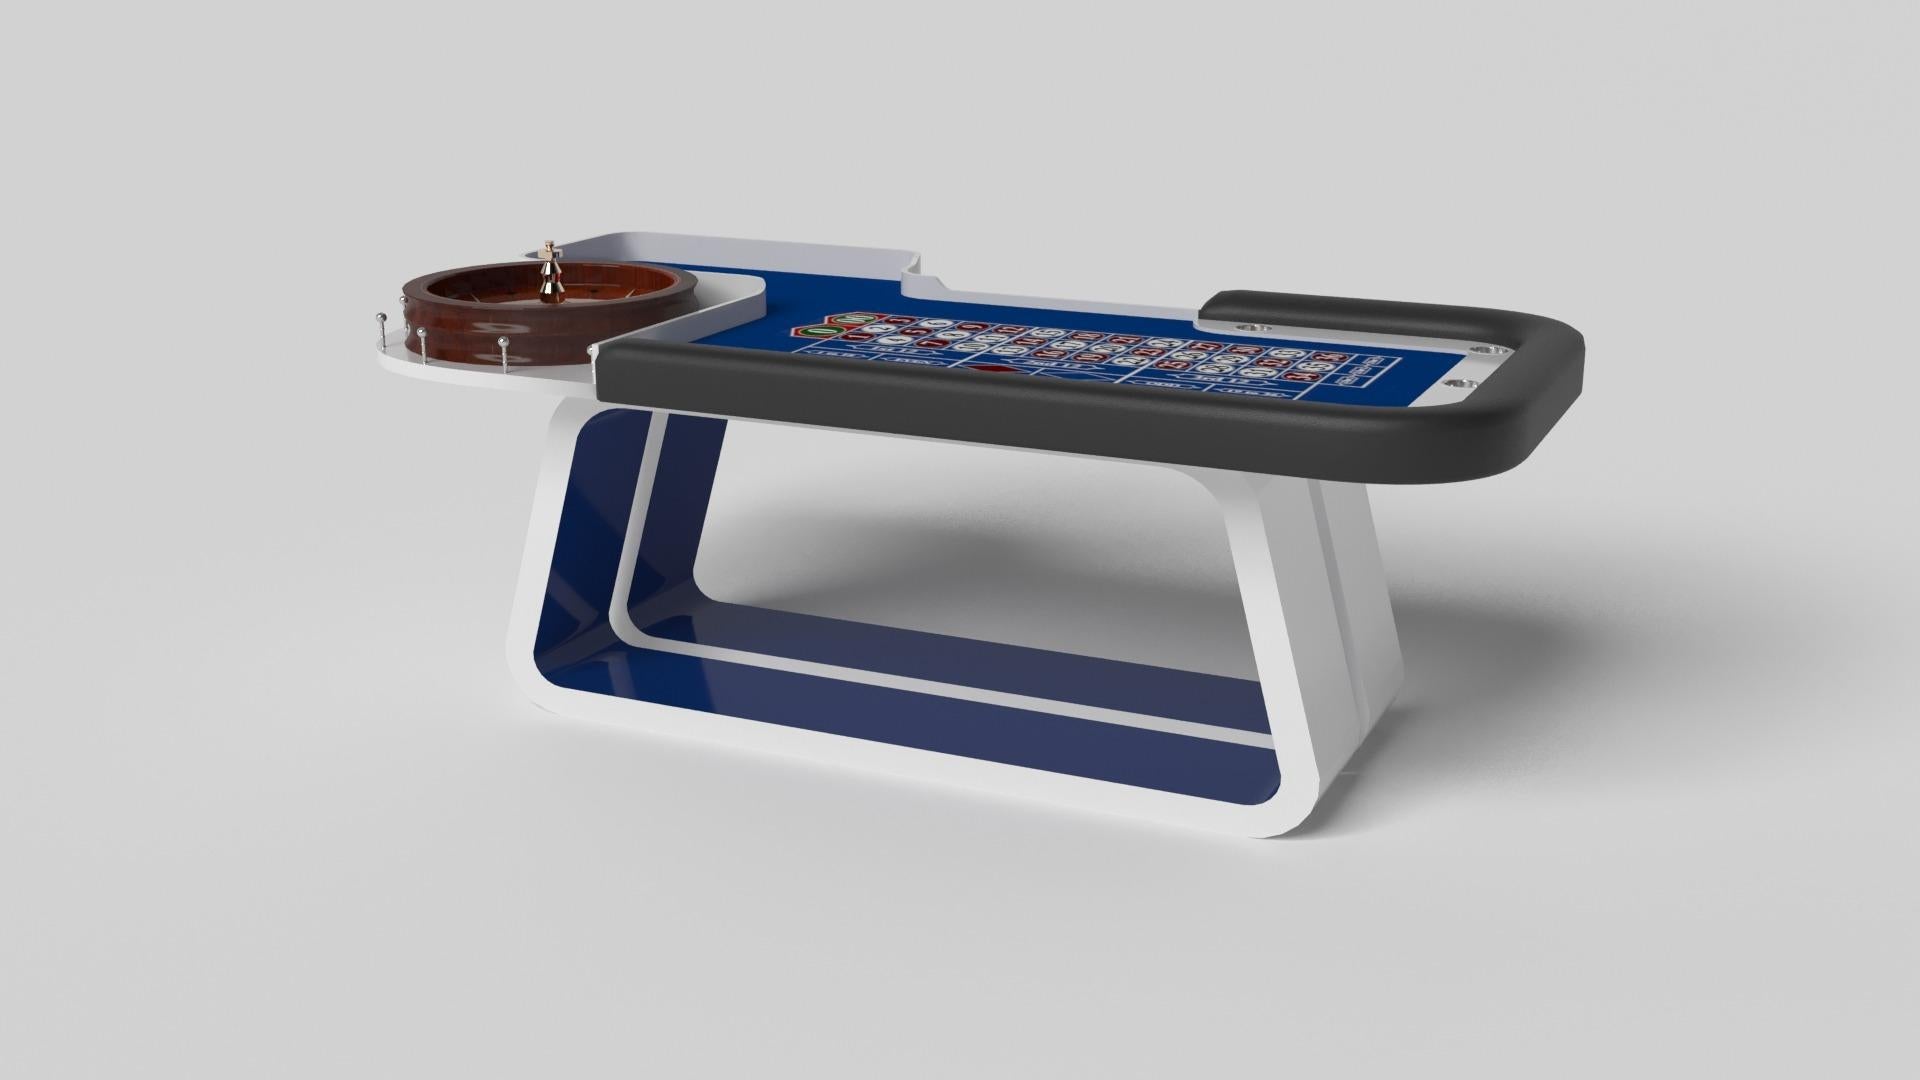 An open base with sweeping curves and smooth edges imparts a light, airy feel upon the Luge roulette table in walnut. Evoking a sense of speed and the spirit of continuous movement, this exclusive game table features a split base with open sides and